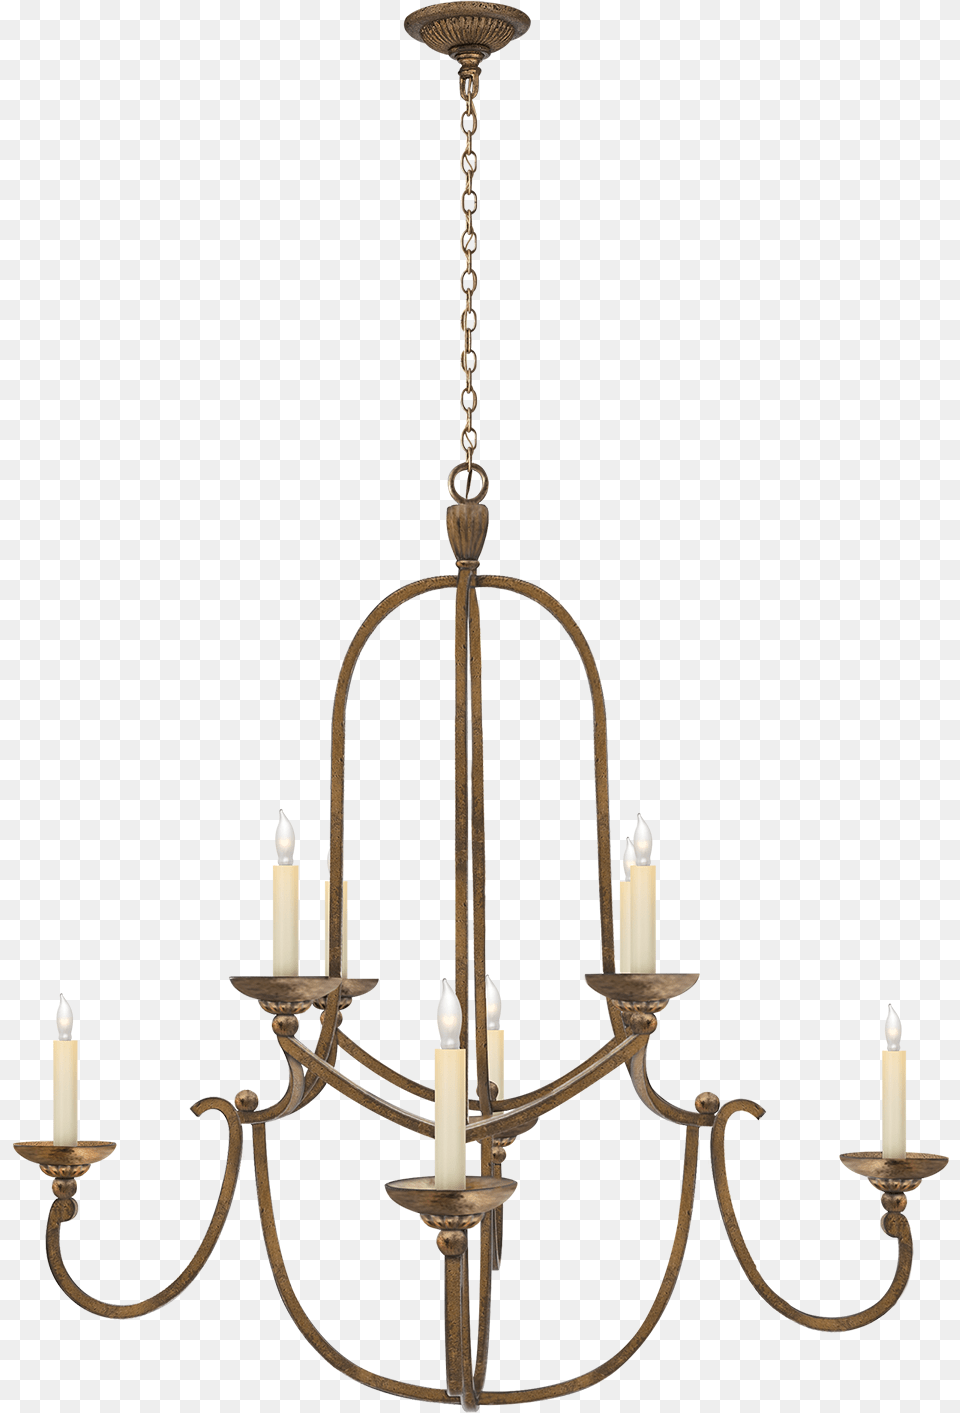 Enchanting Circa Lighting Chandeliers With Circa Lighting Visual Comfort Chandeliers, Chandelier, Lamp Free Transparent Png